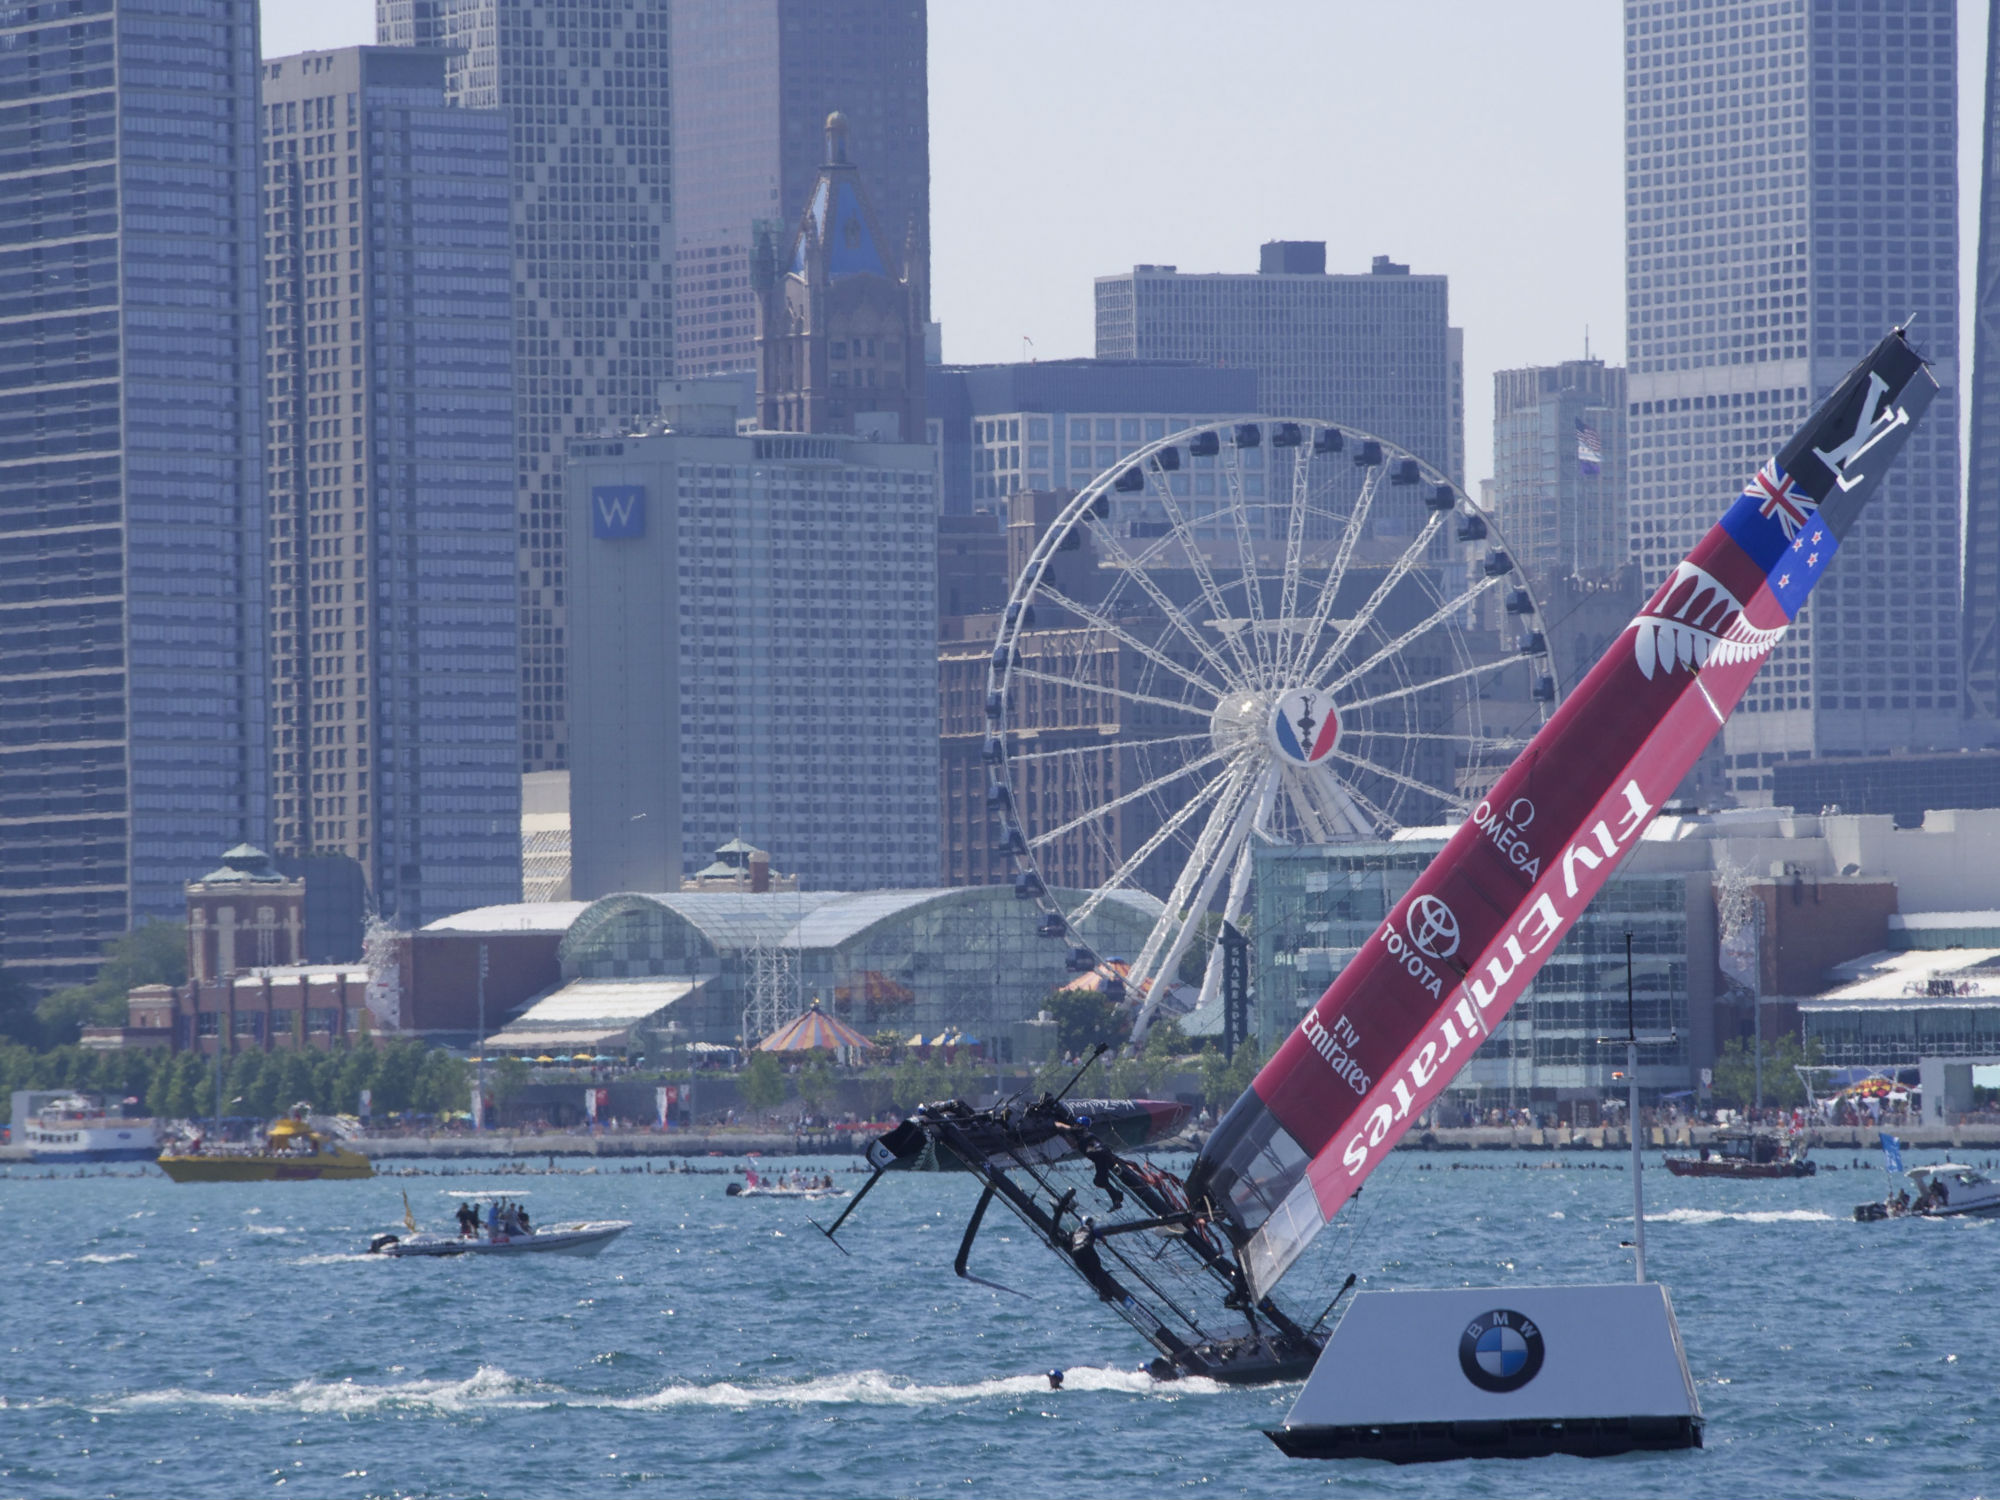 Catamaran tipping at America's Cup Chicago June 2016